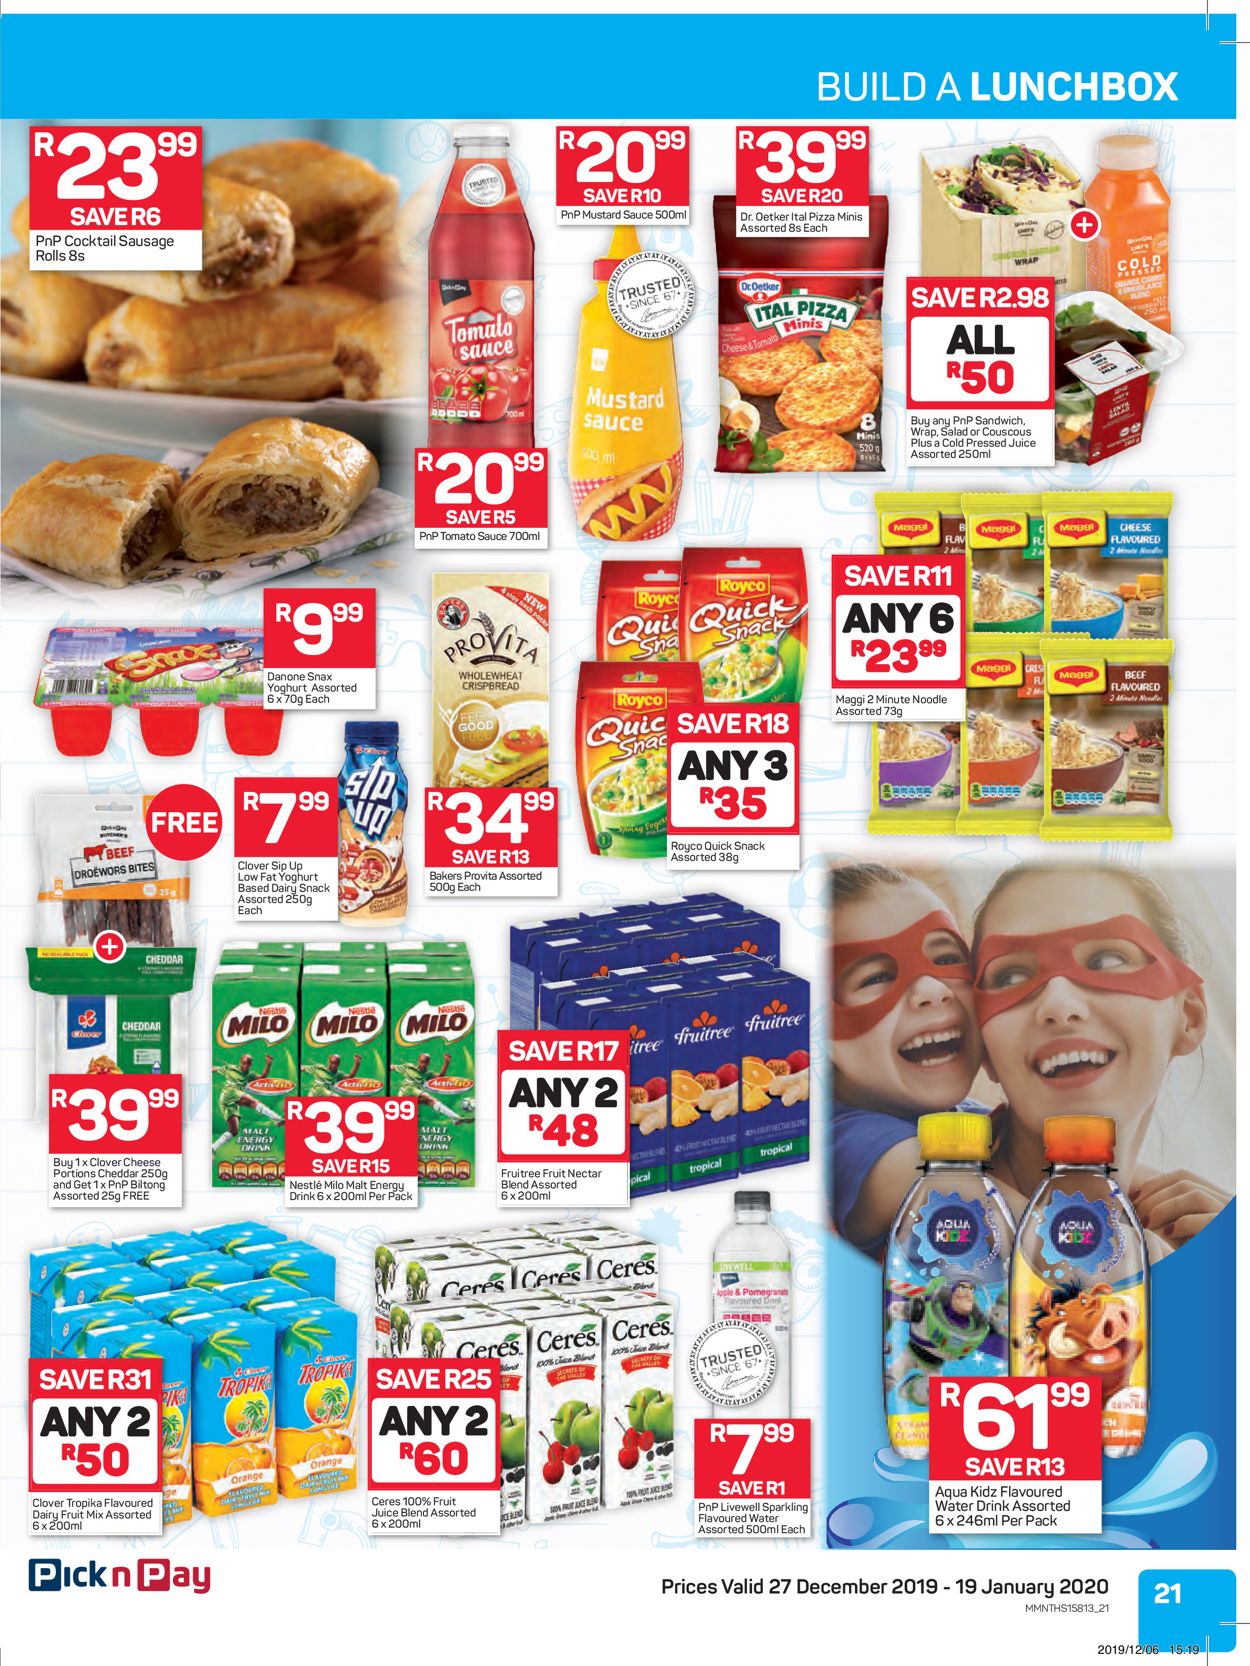 Pick n Pay Back 2 School Catalogue - 2019/12/27-2020/01/19 (Page 22)